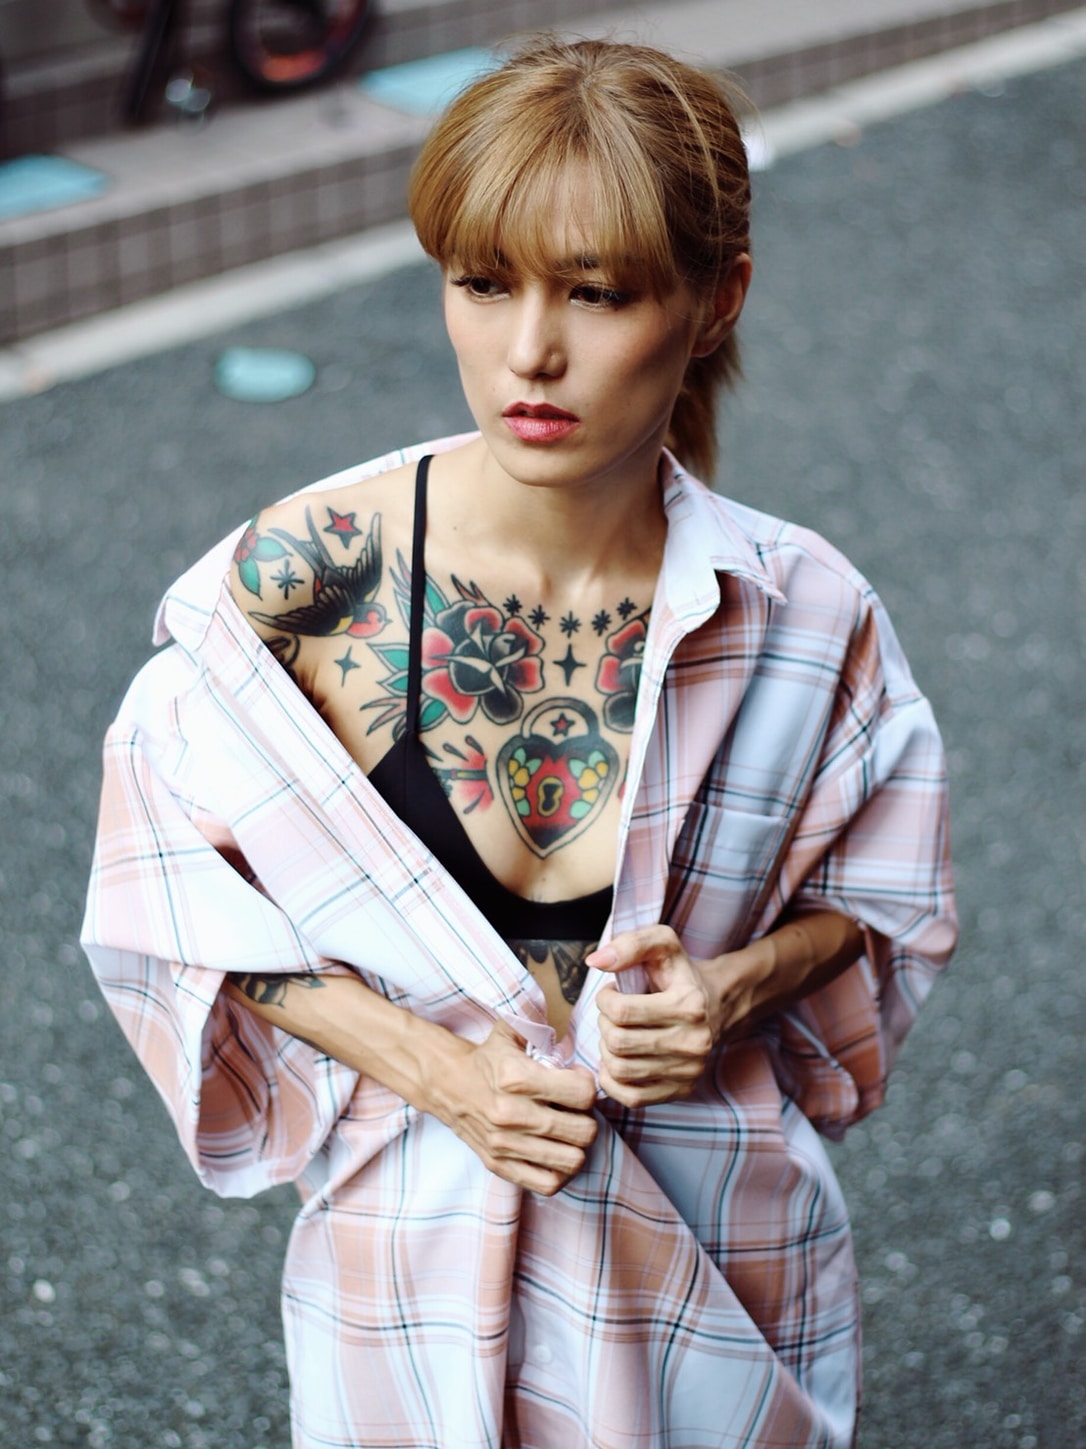 Photo Story New Project Showcases Tattooed Women In Japan To Shift